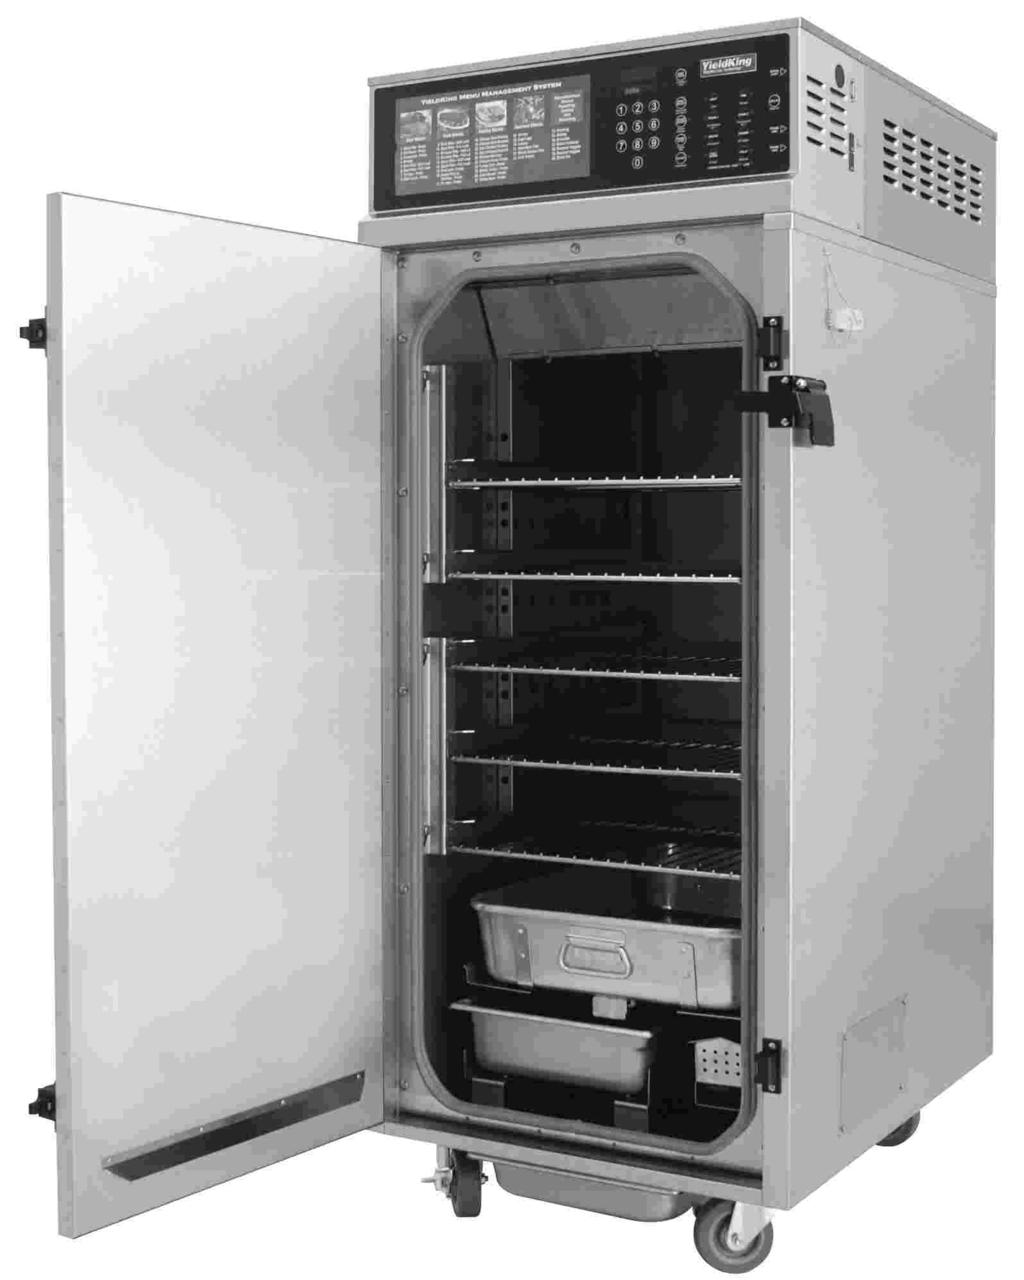 1. Omni-Chef Control Panel 18. Main Element/ Fan Shroud 20. Menu Management System Card 19. Convection Fan Motor Assembly (inside the top housing) 2. Control and Fan Motor Housing 3. Flue 4.